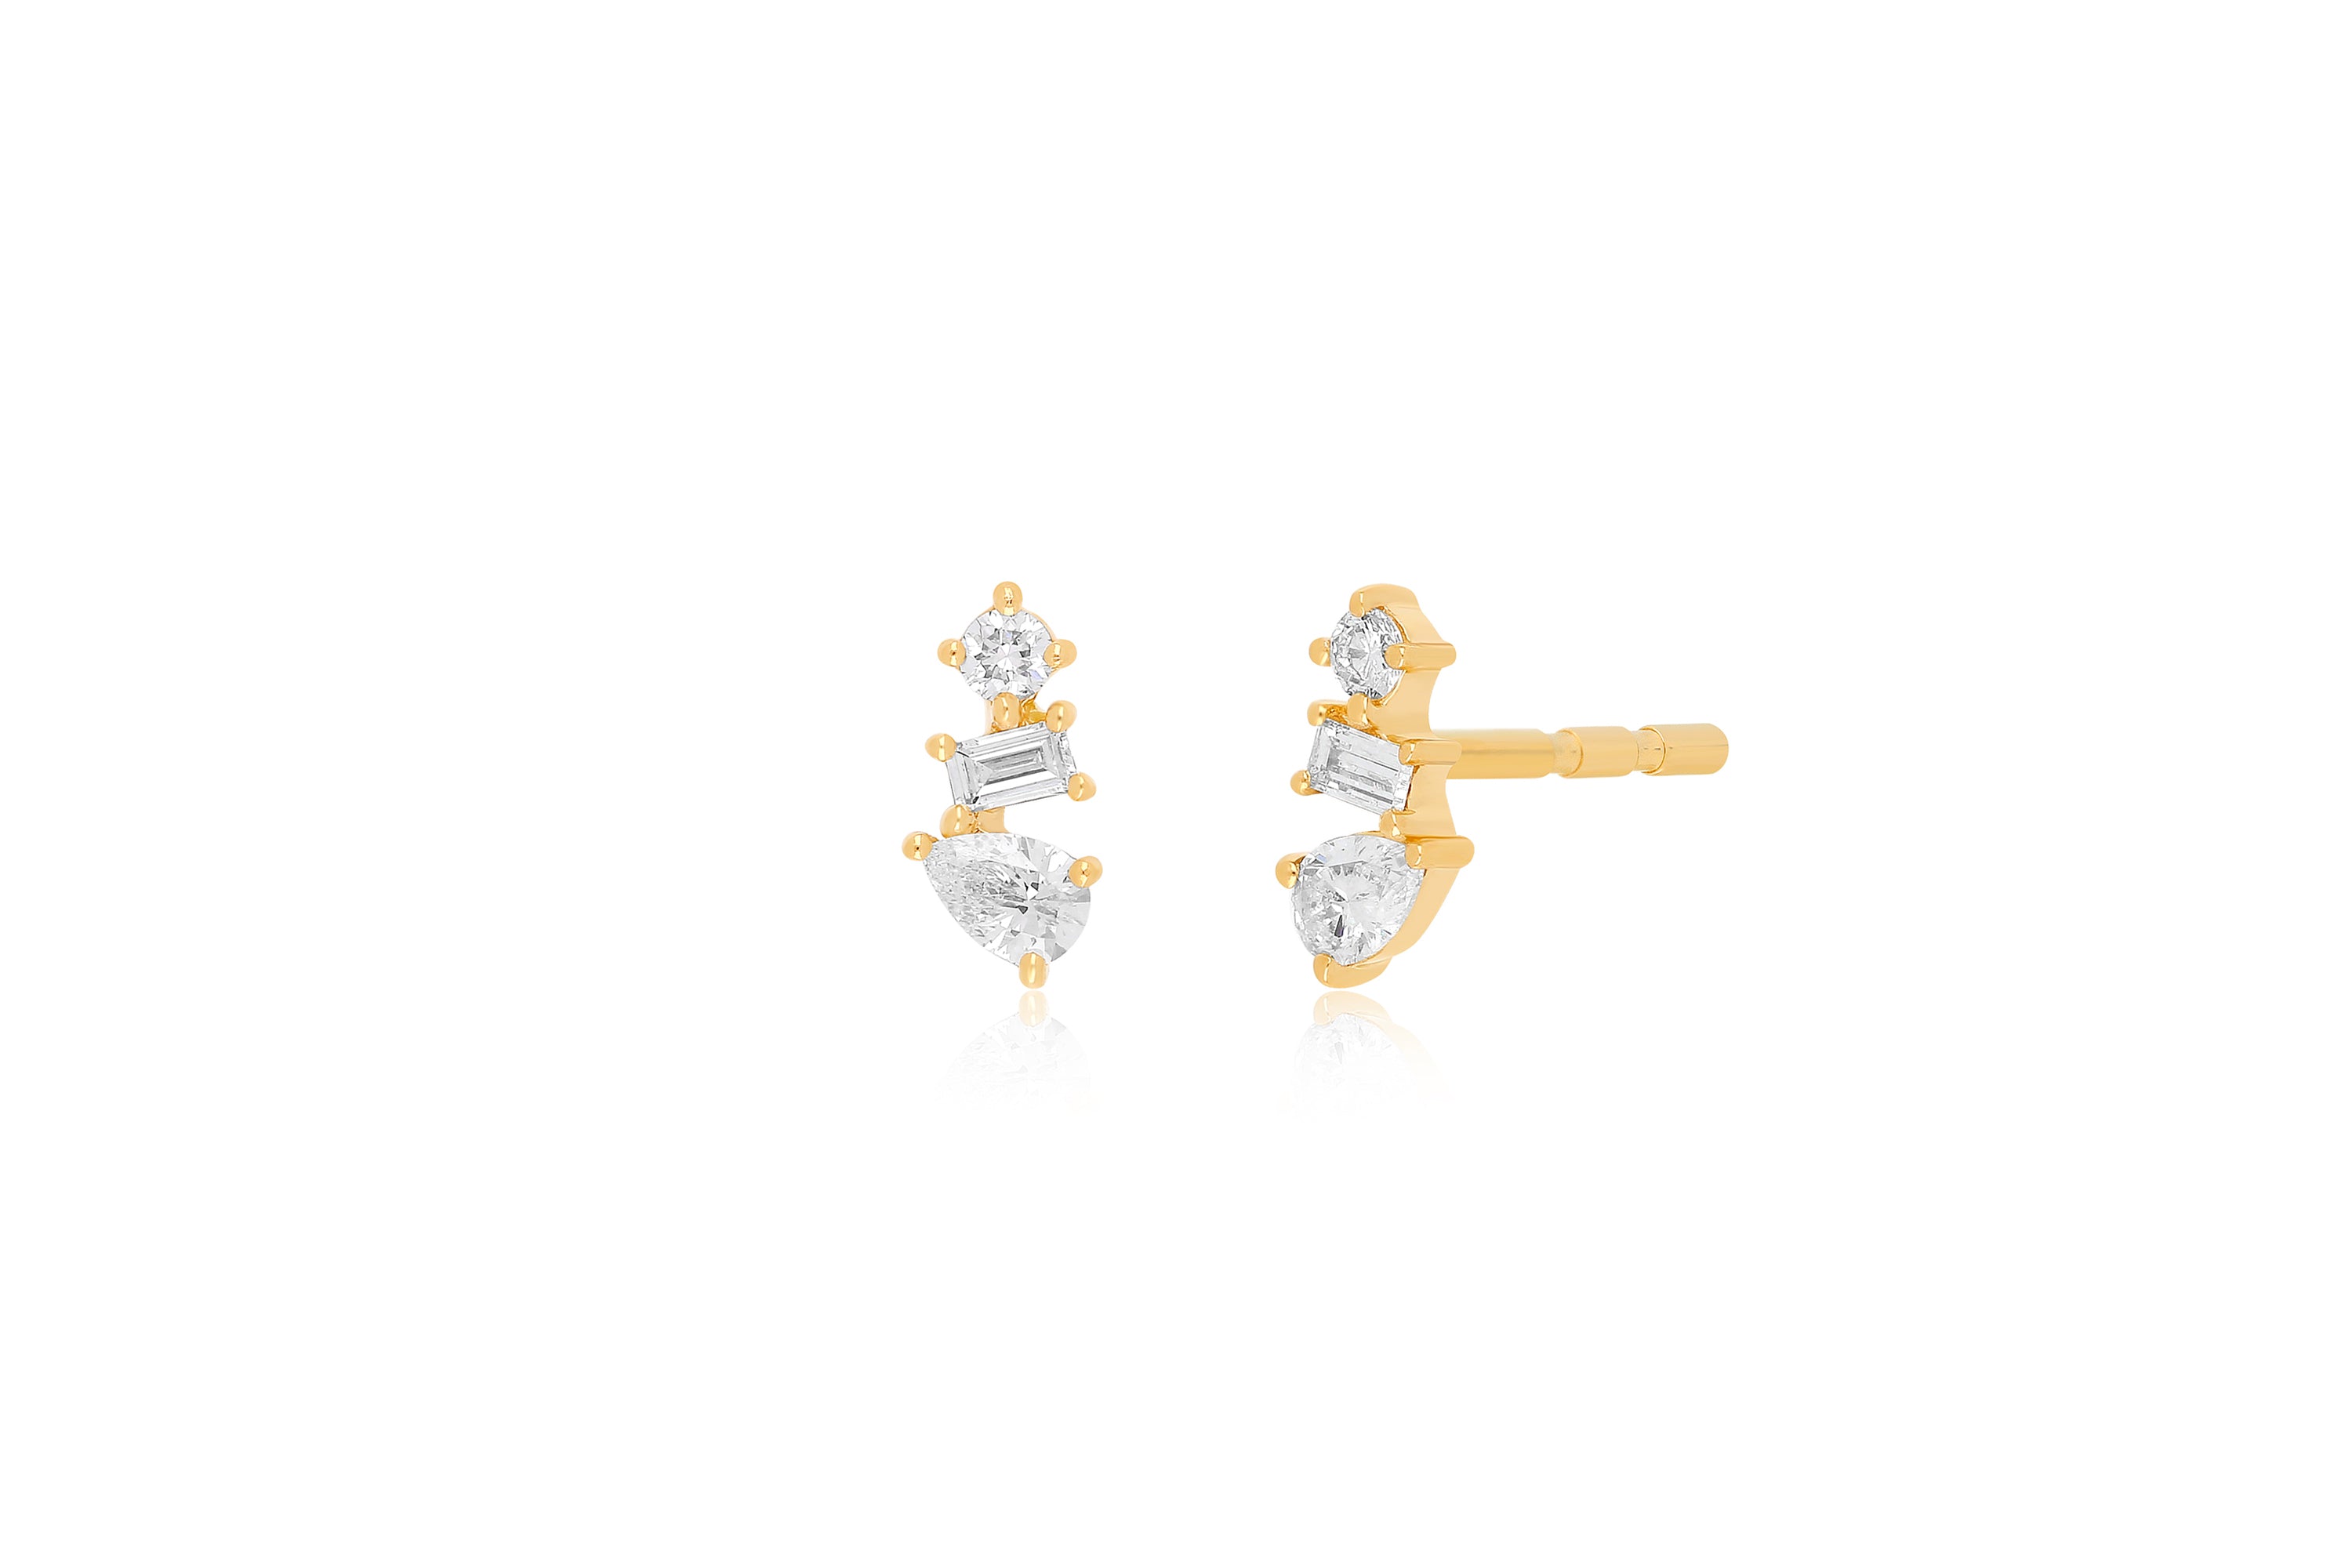 Multi Faceted Diamond Stud Earring in 14k yellow gold